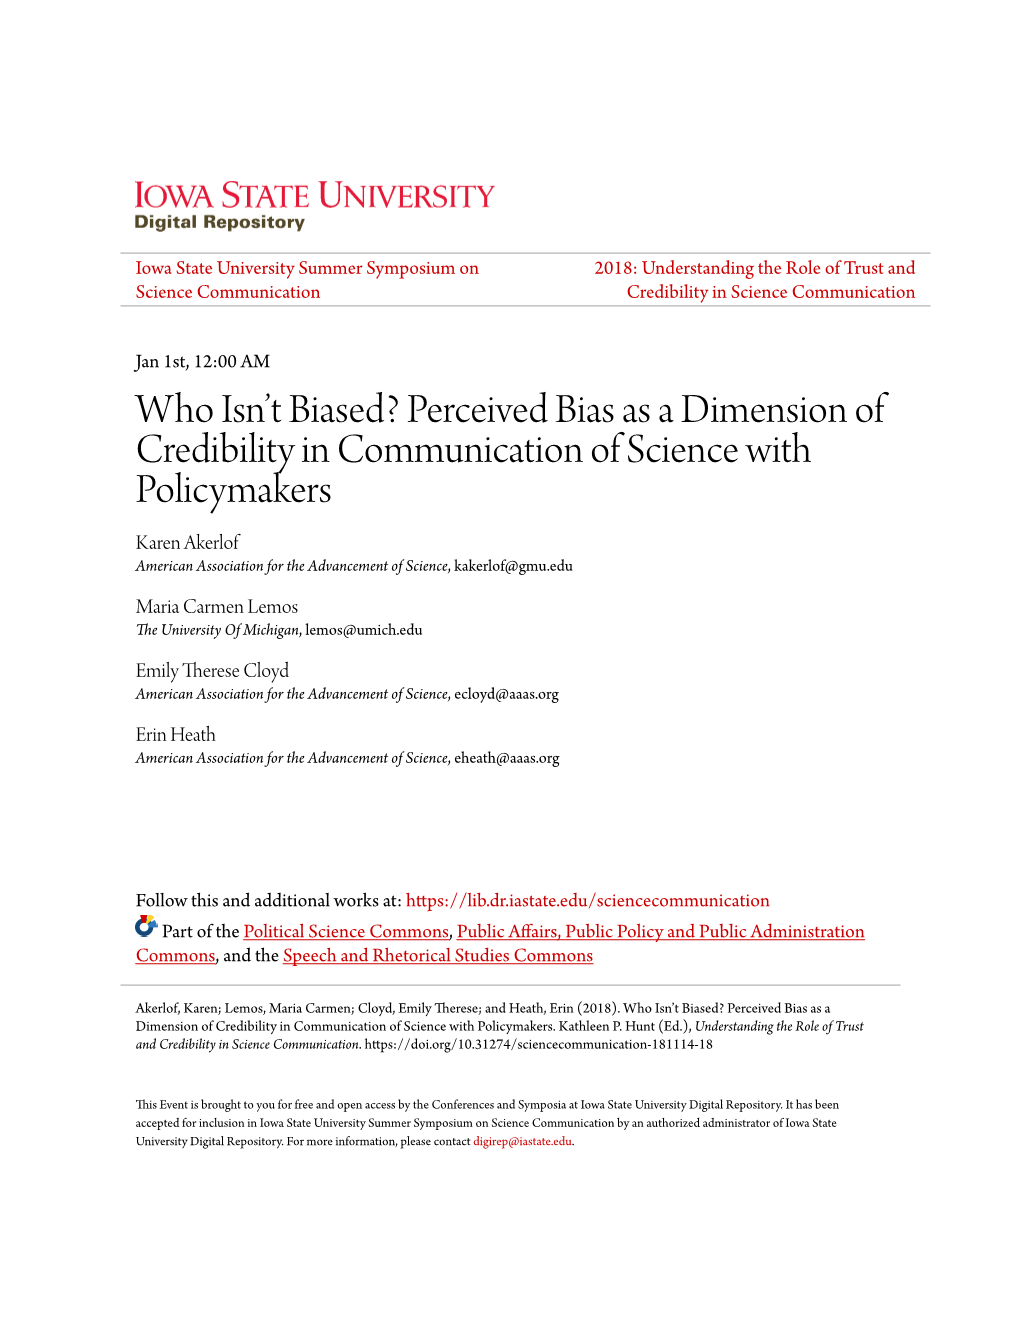 Perceived Bias As a Dimension of Credibility in Communication Of